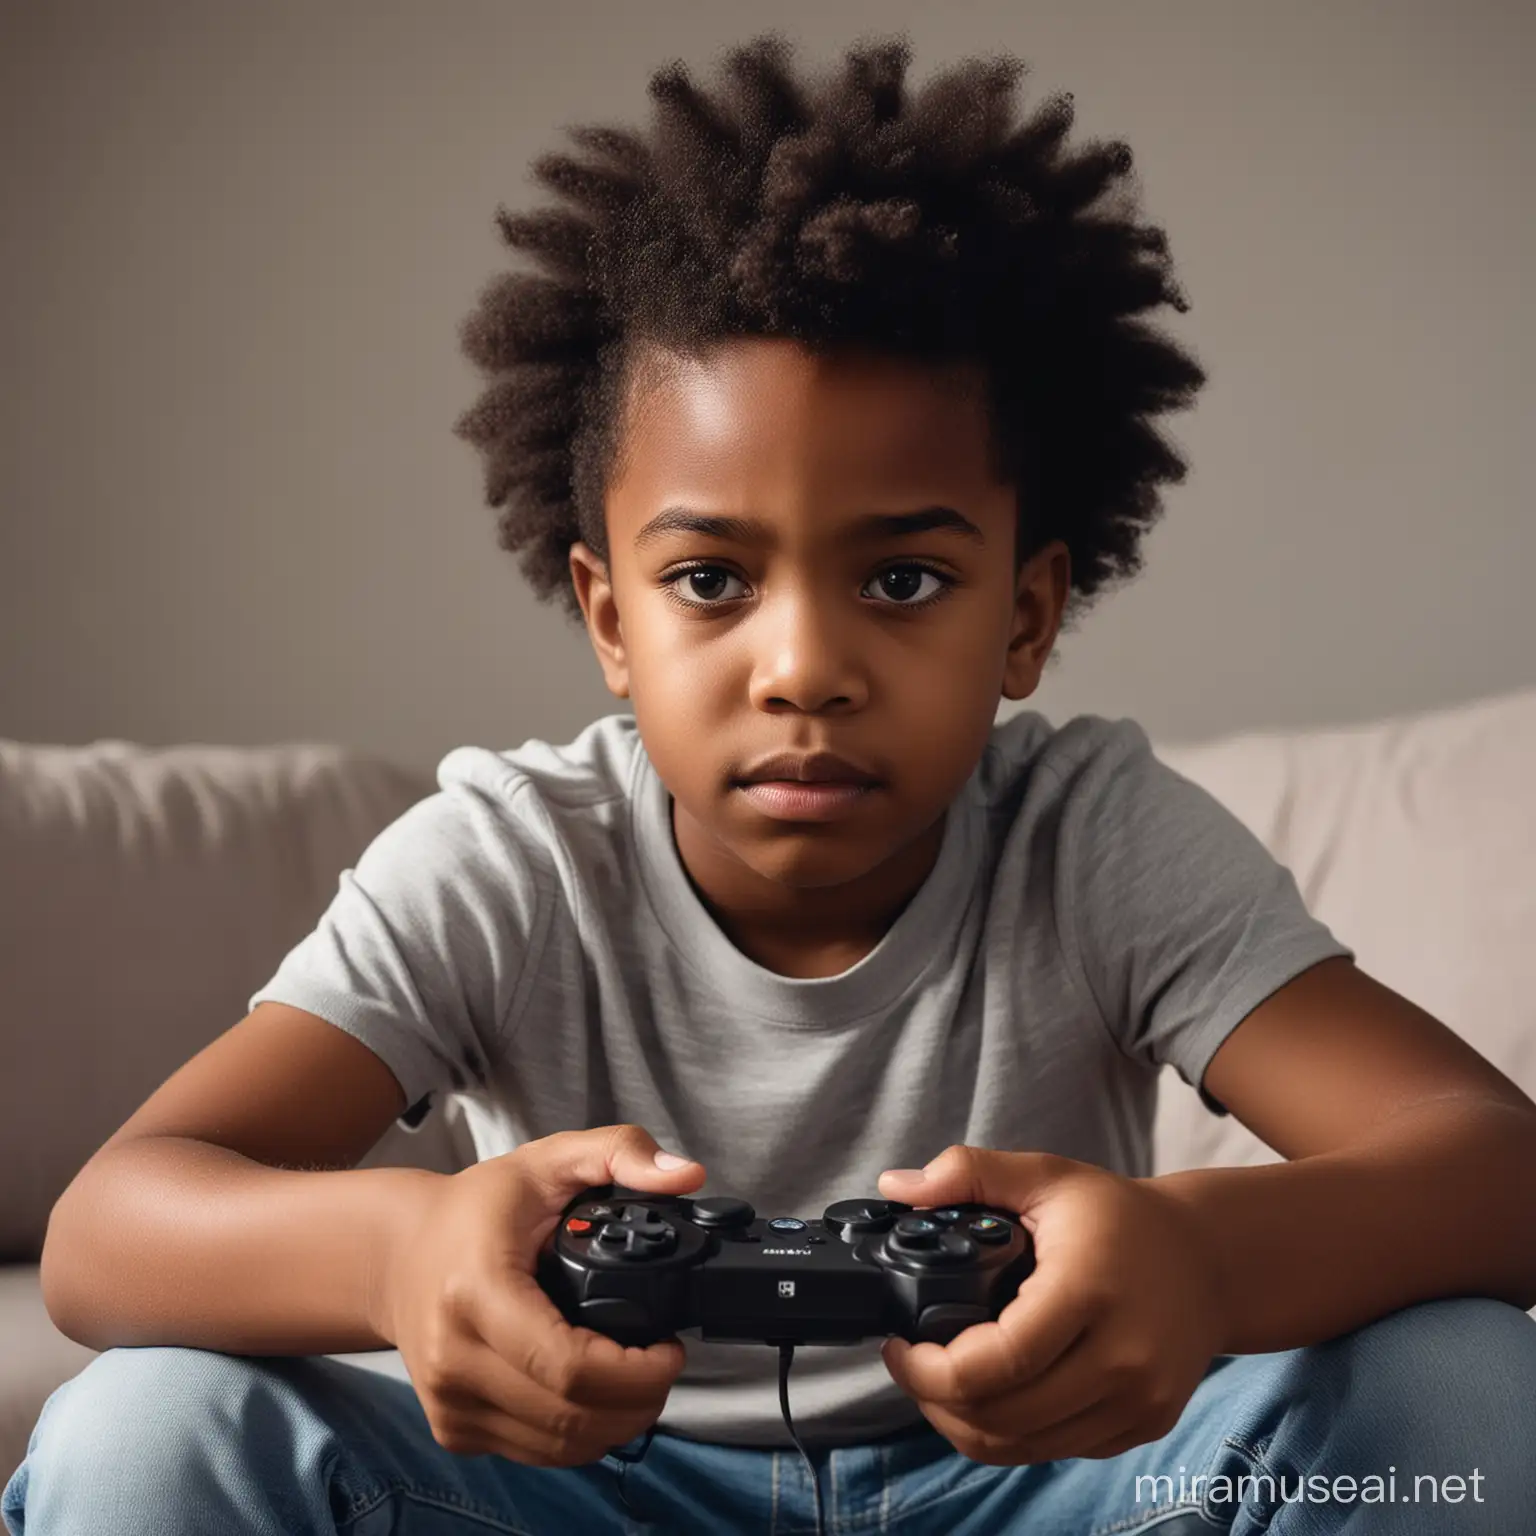 Serious Black Child Engrossed in Video Game Play